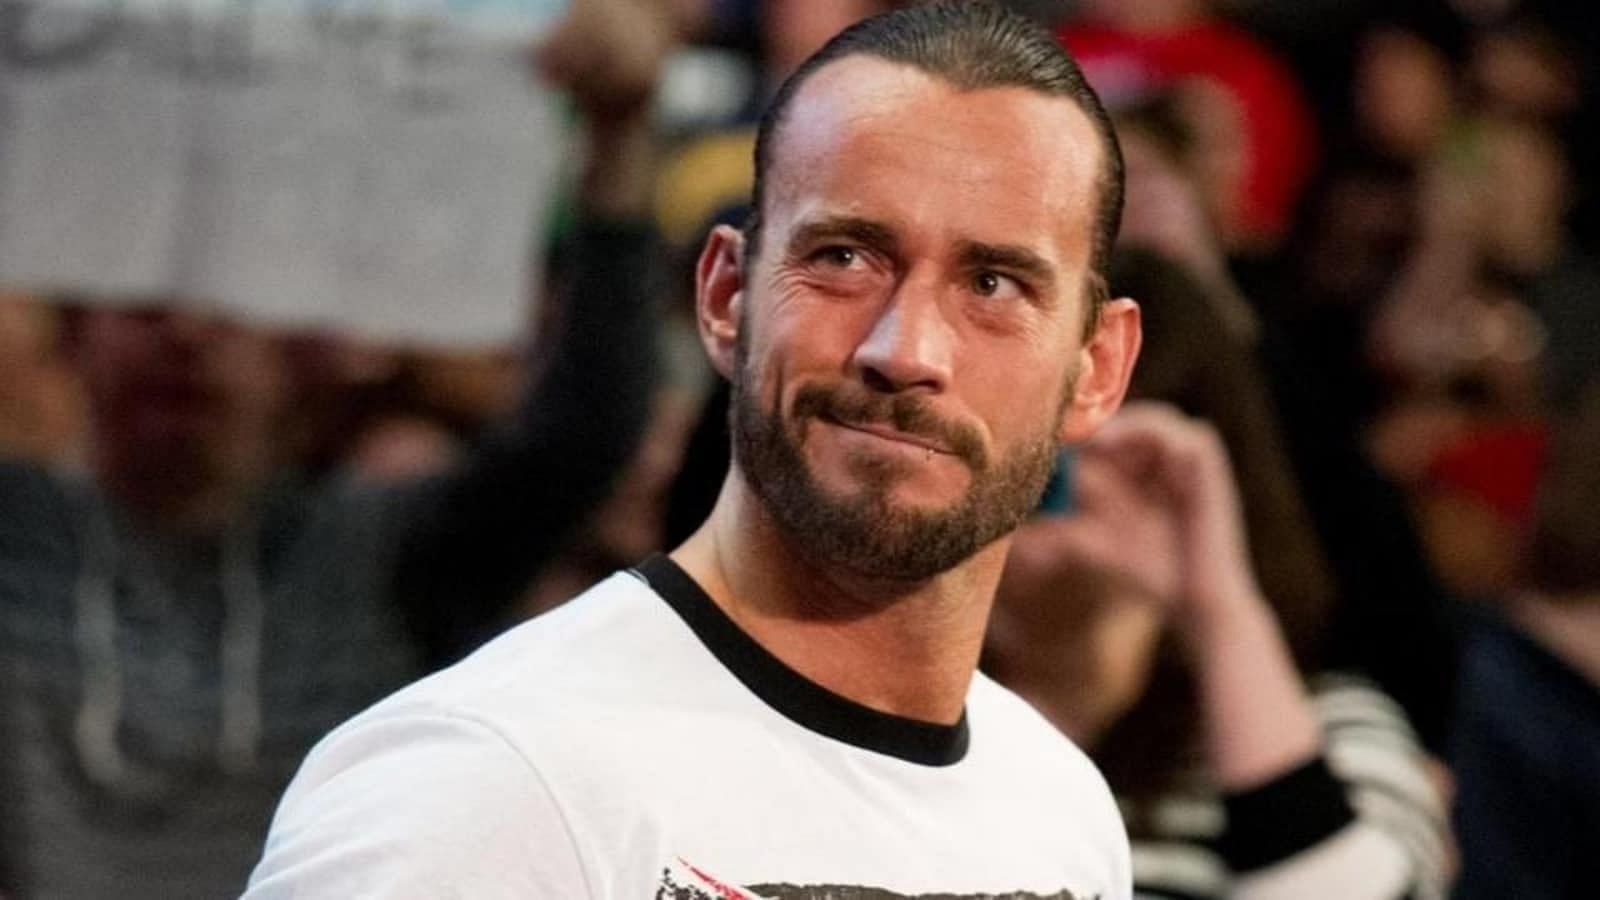 CM Punk will face Hangman Page at Double or Nothing